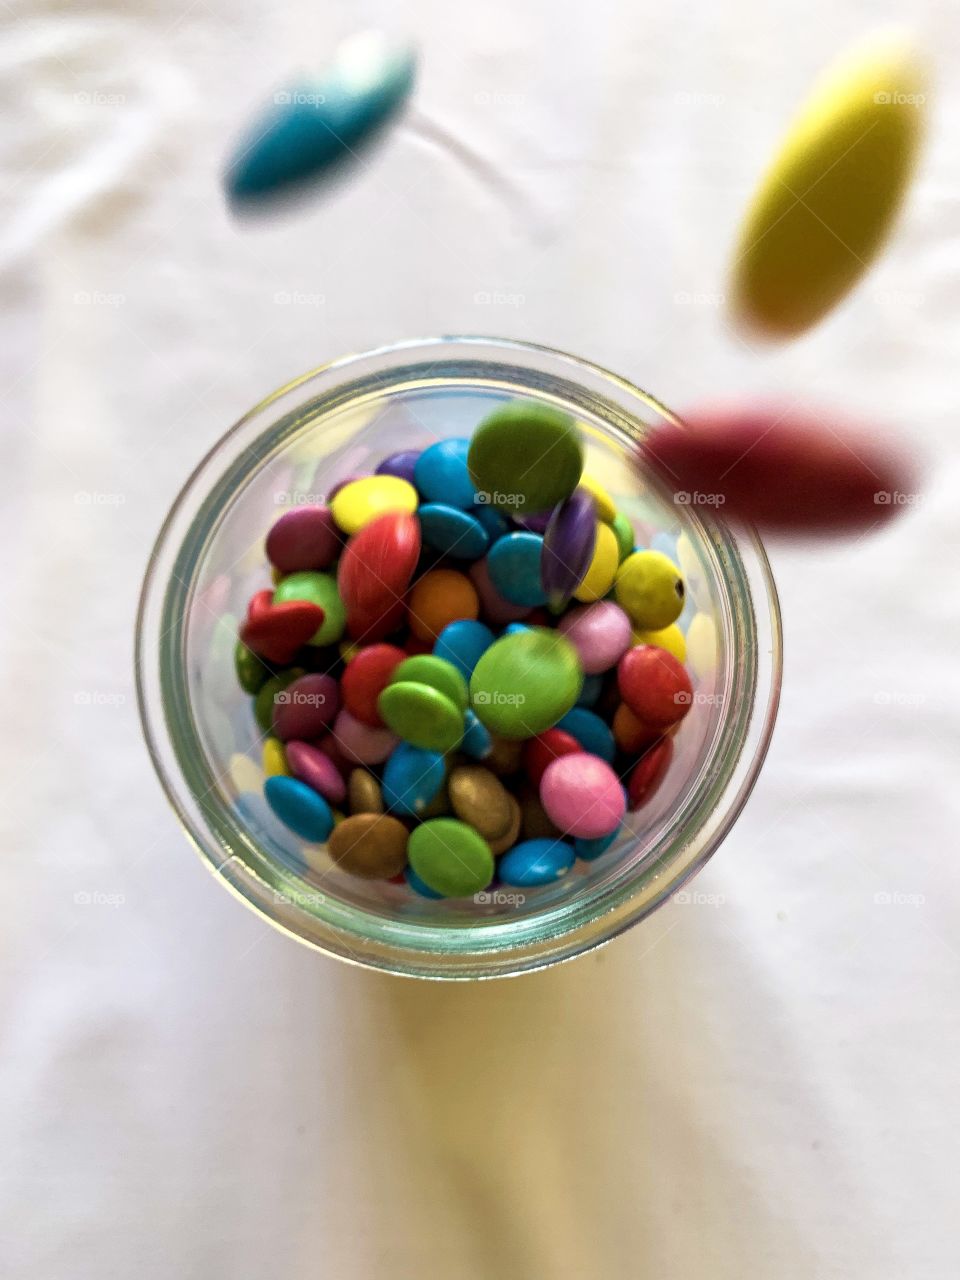 Best of the best. These smarties were captured falling into a cylindrical container